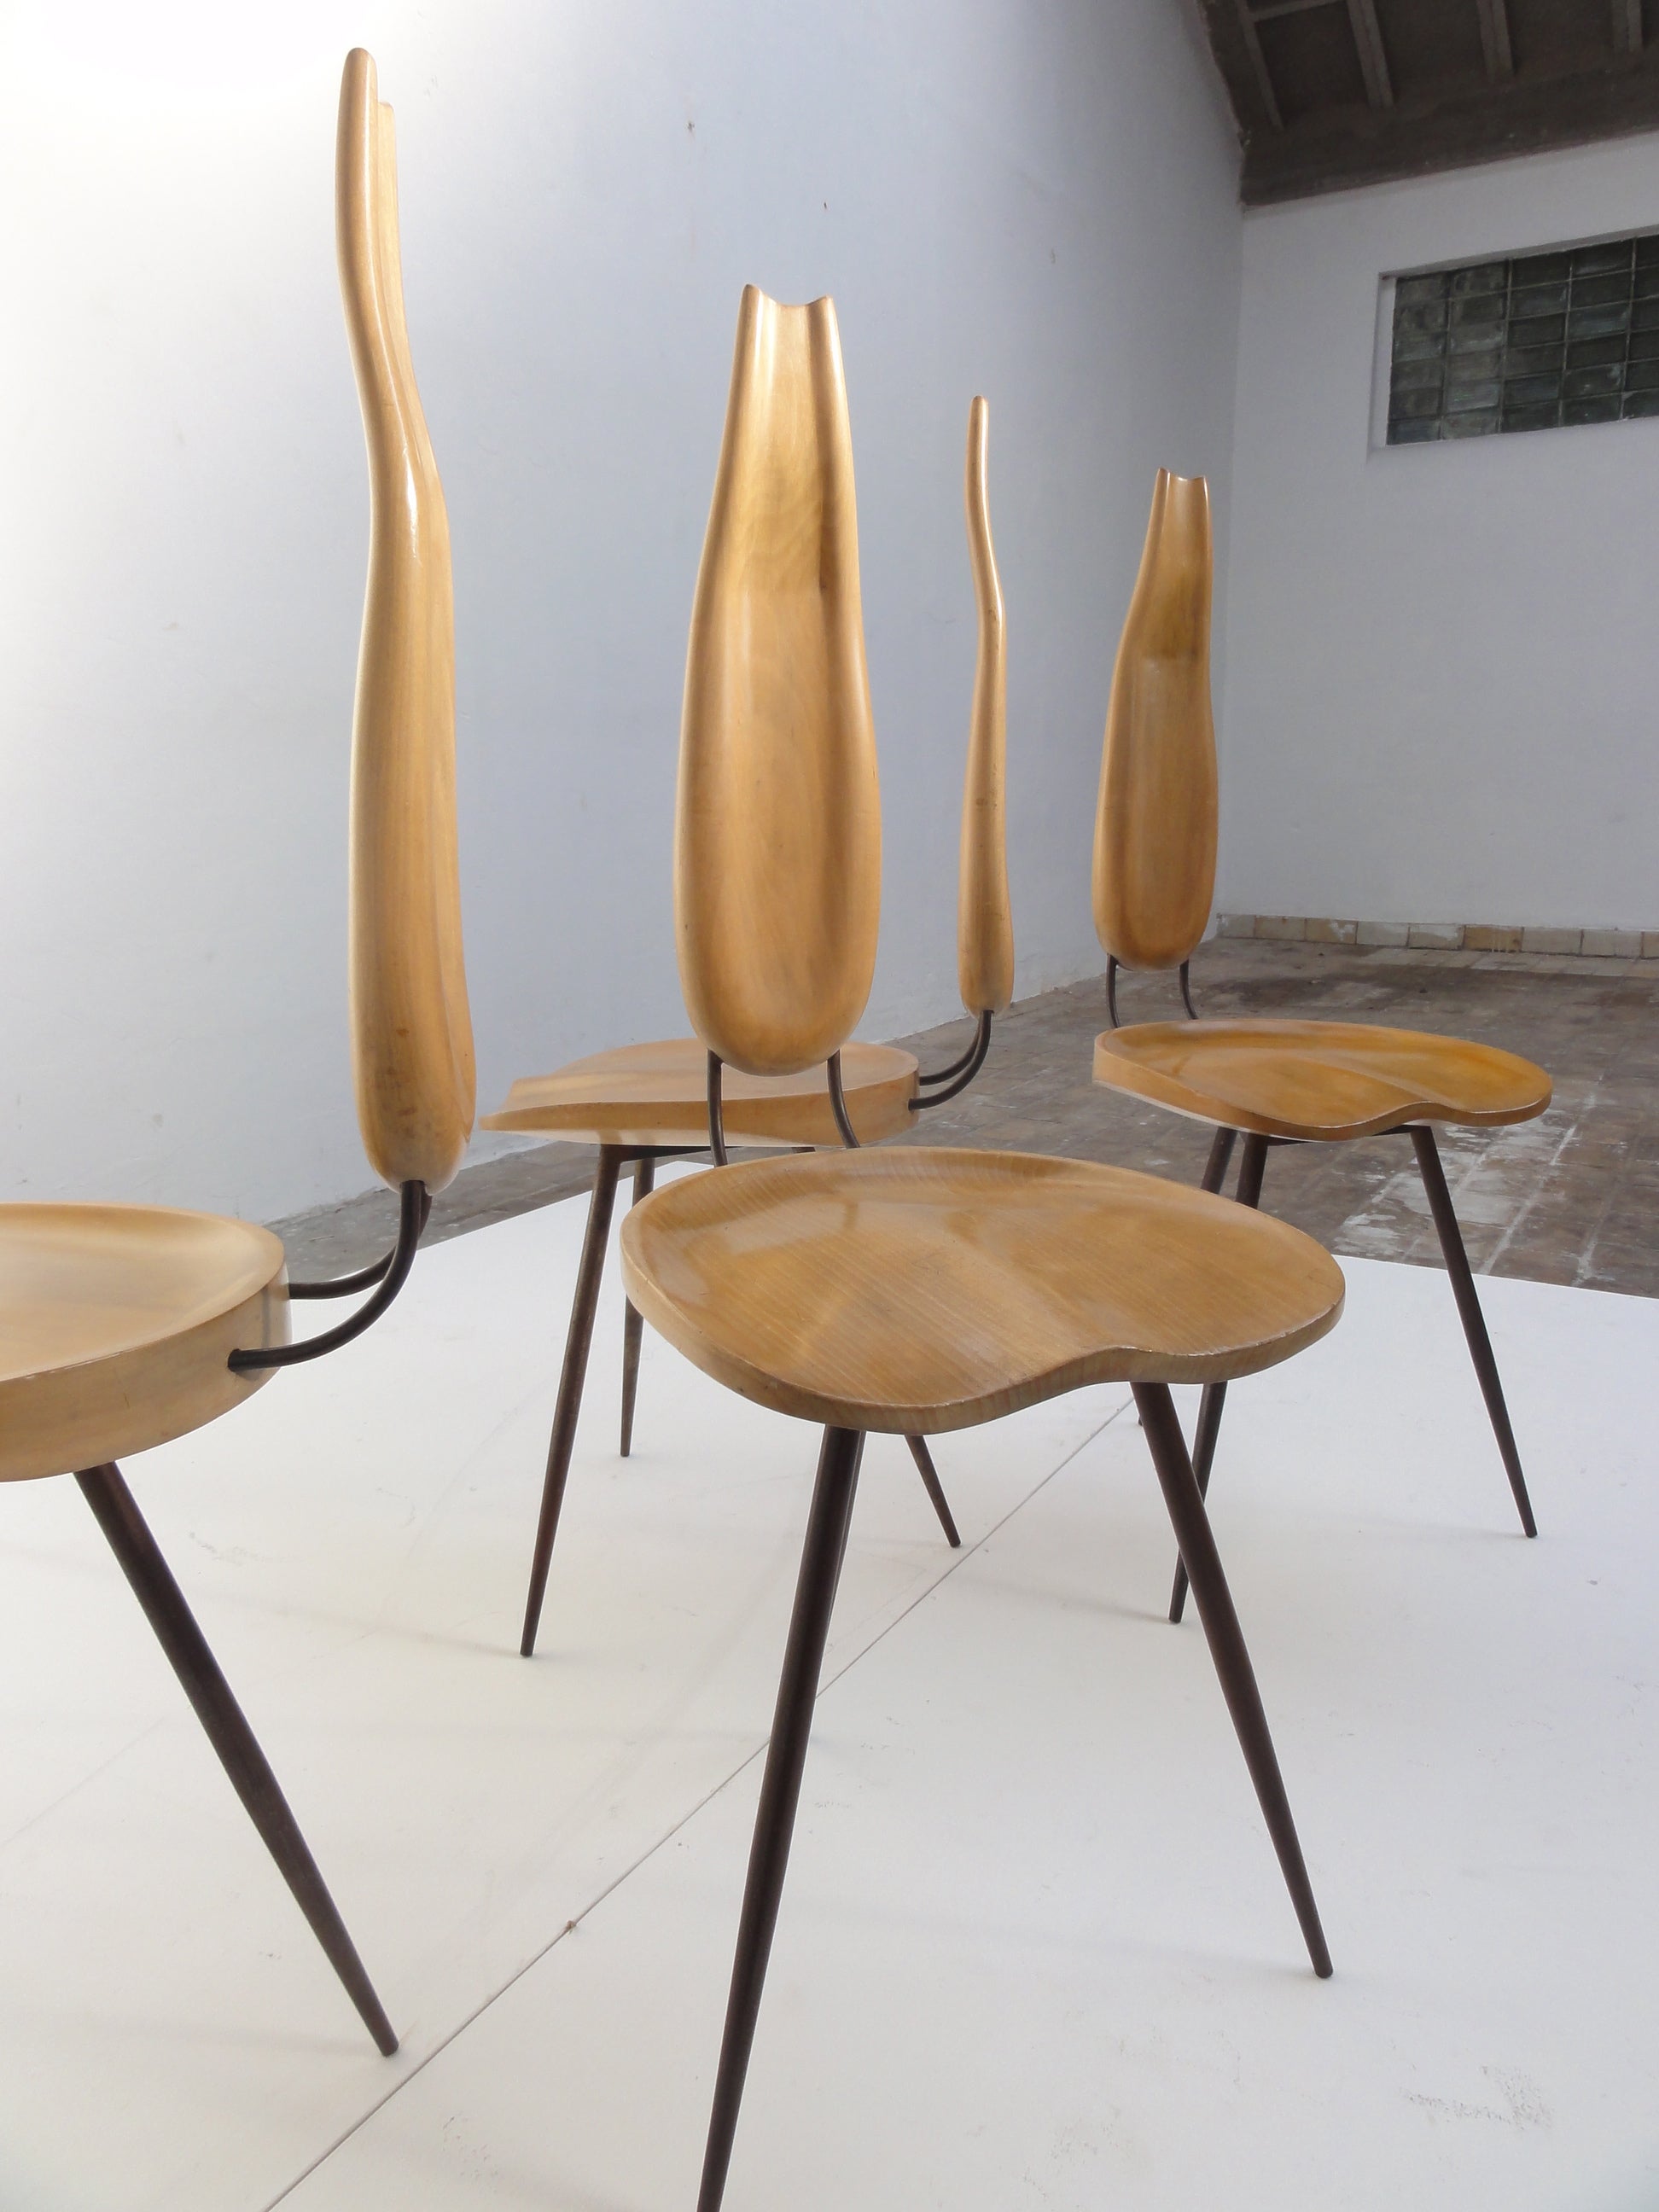 italian artisan chairs ca 1955-60 in the style of Mollino, important provenance